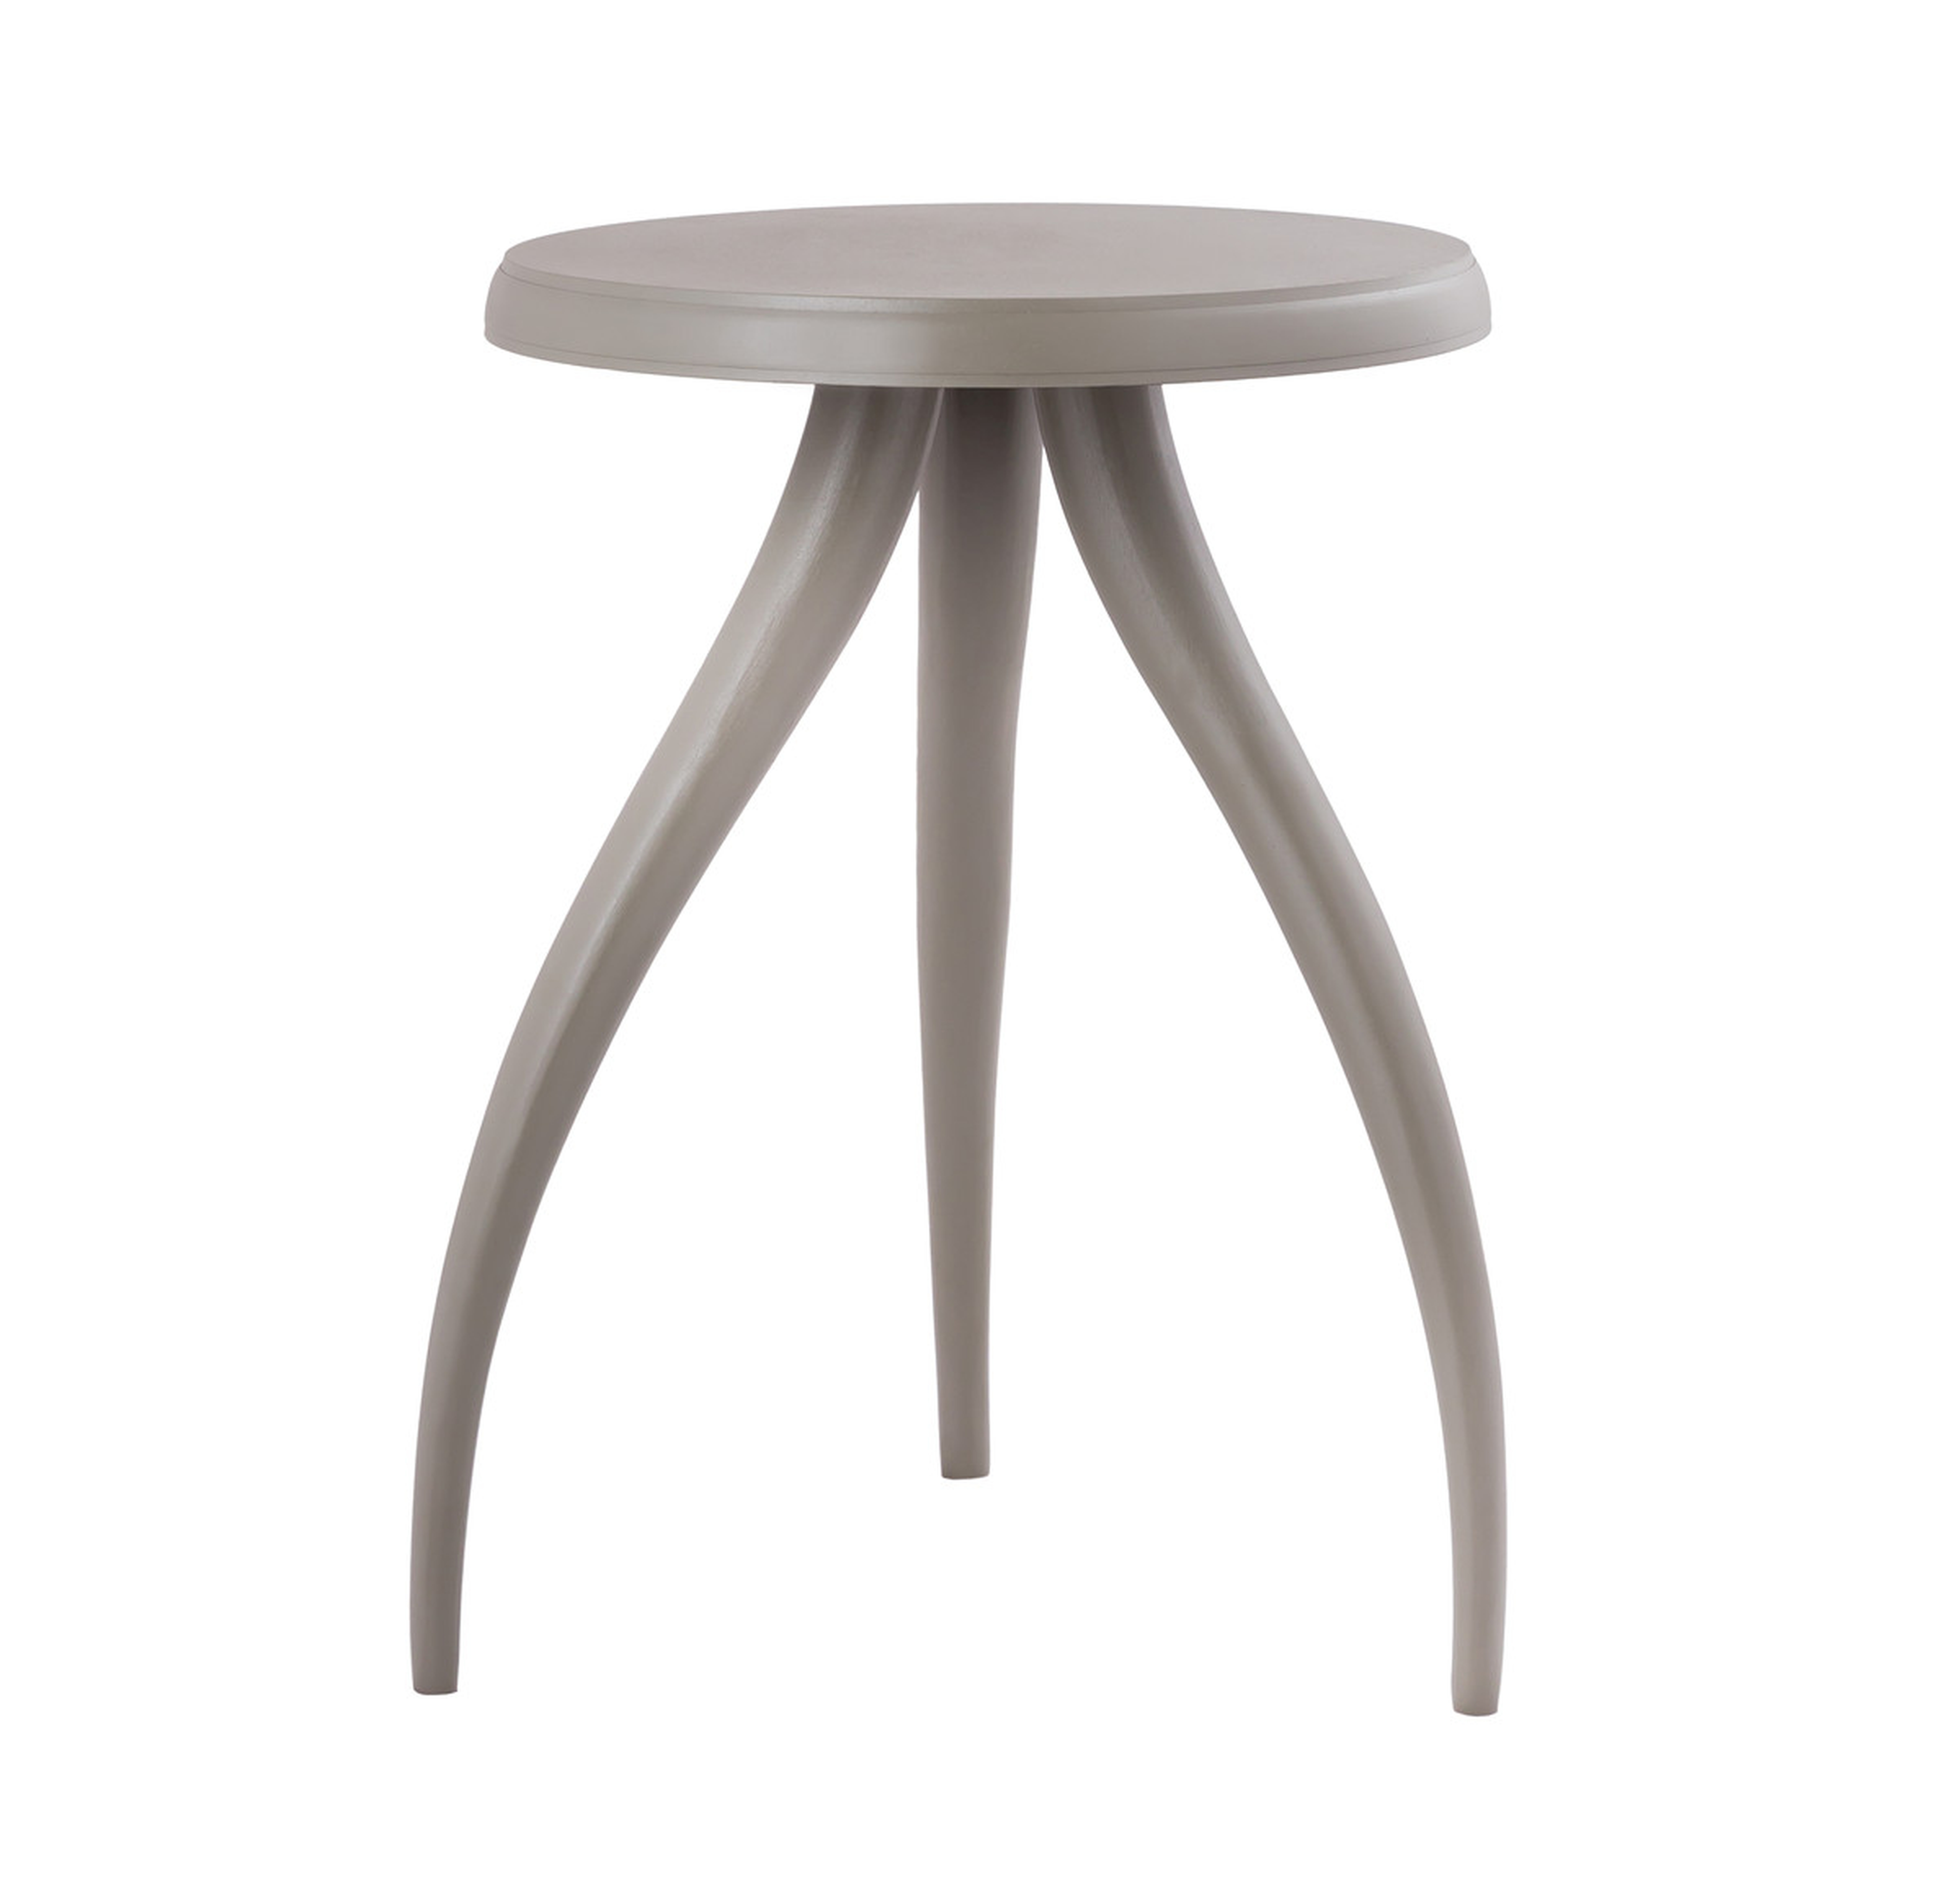 Rylie Morgan Textured Side Table - Maren Home